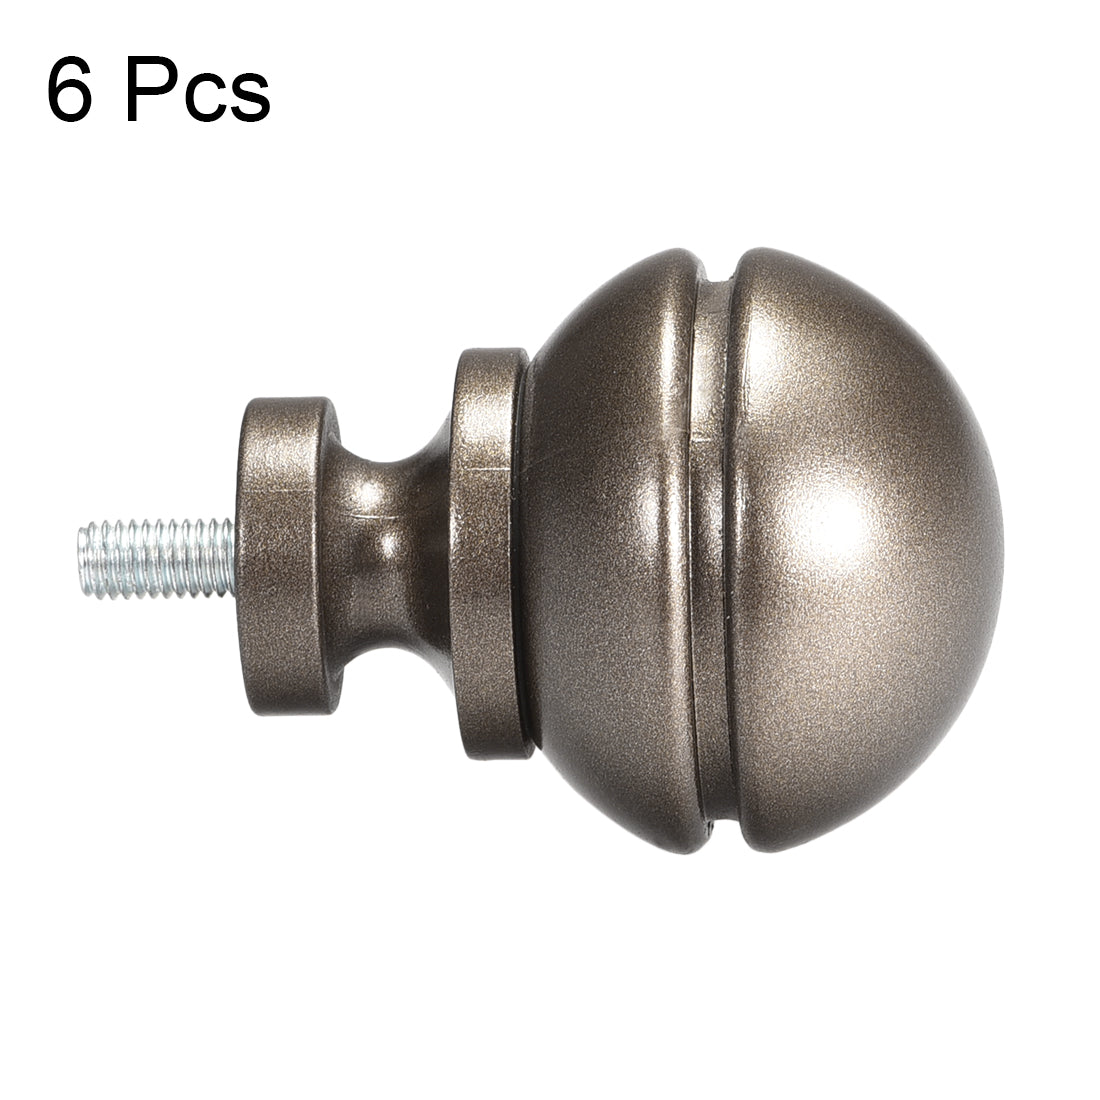 uxcell Uxcell Curtain Rod Finials Plastic End 54mm x 36mm Brown 6pcs